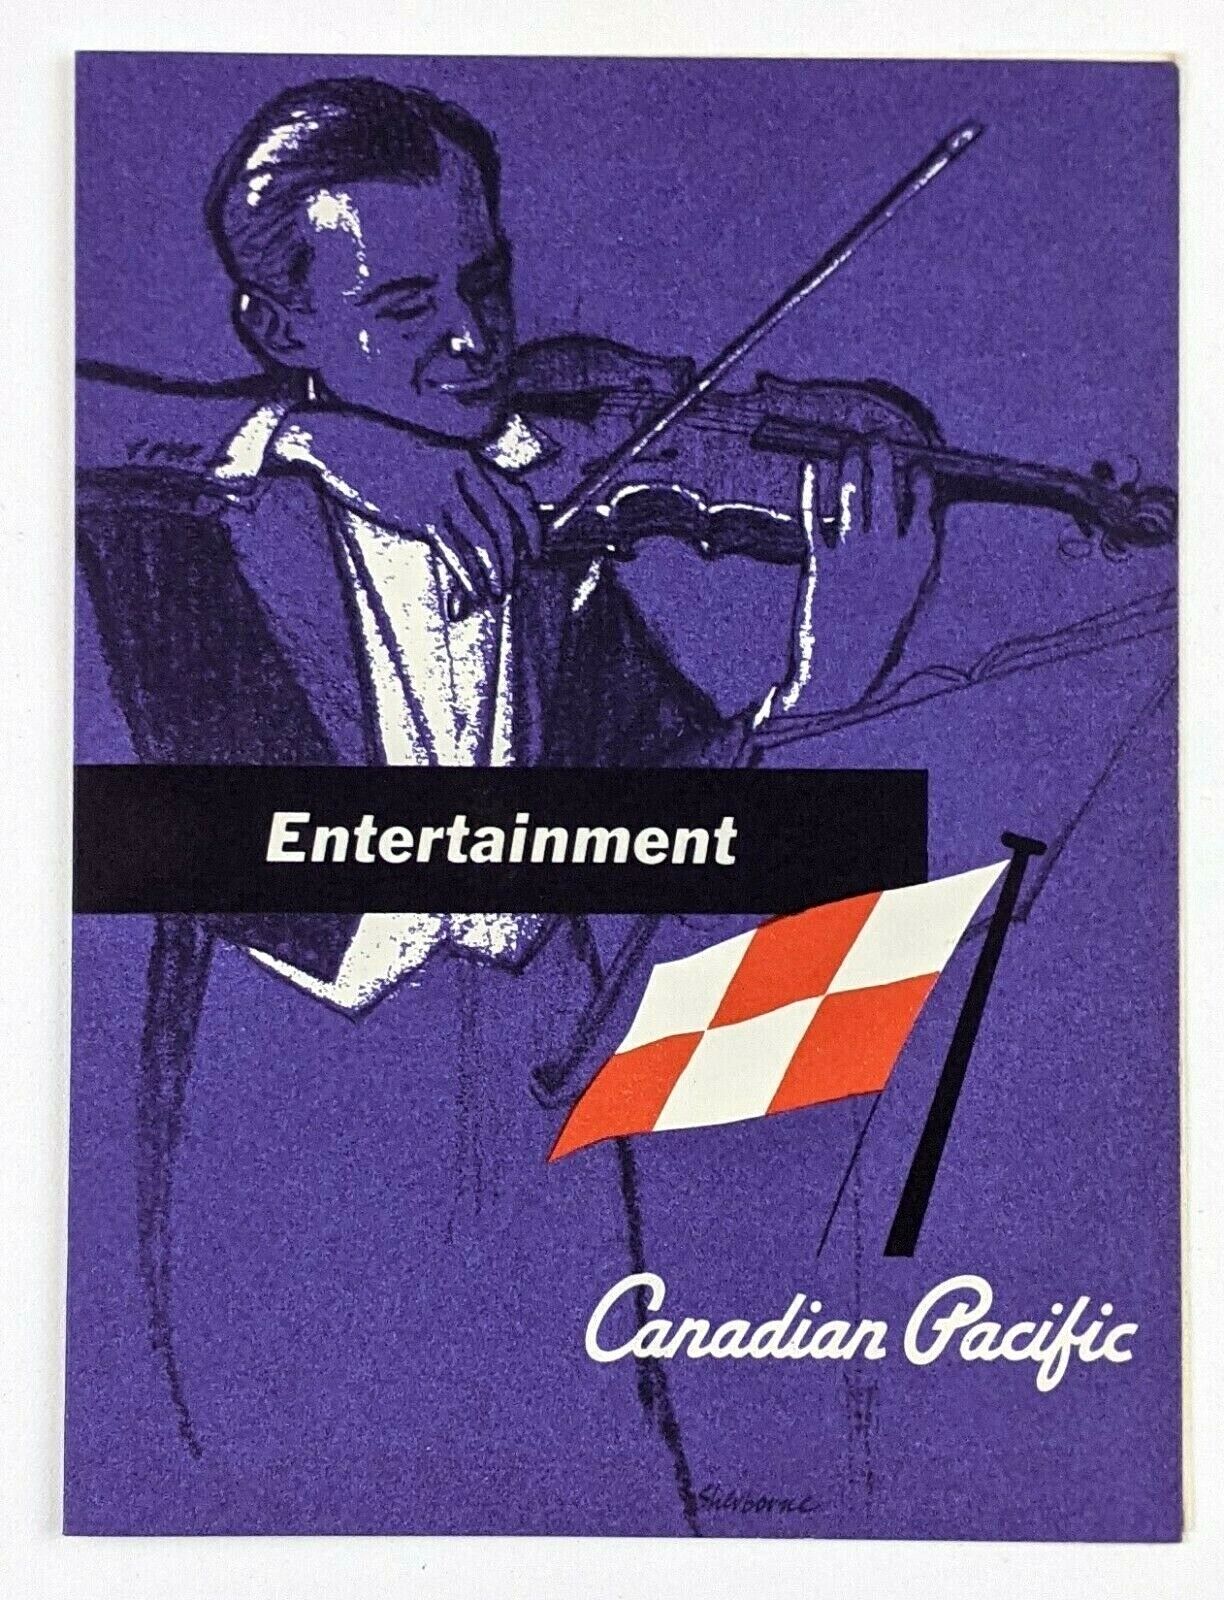 1964 Canadian Pacific Steamship SS Empress of England June 20 Entertainment Card